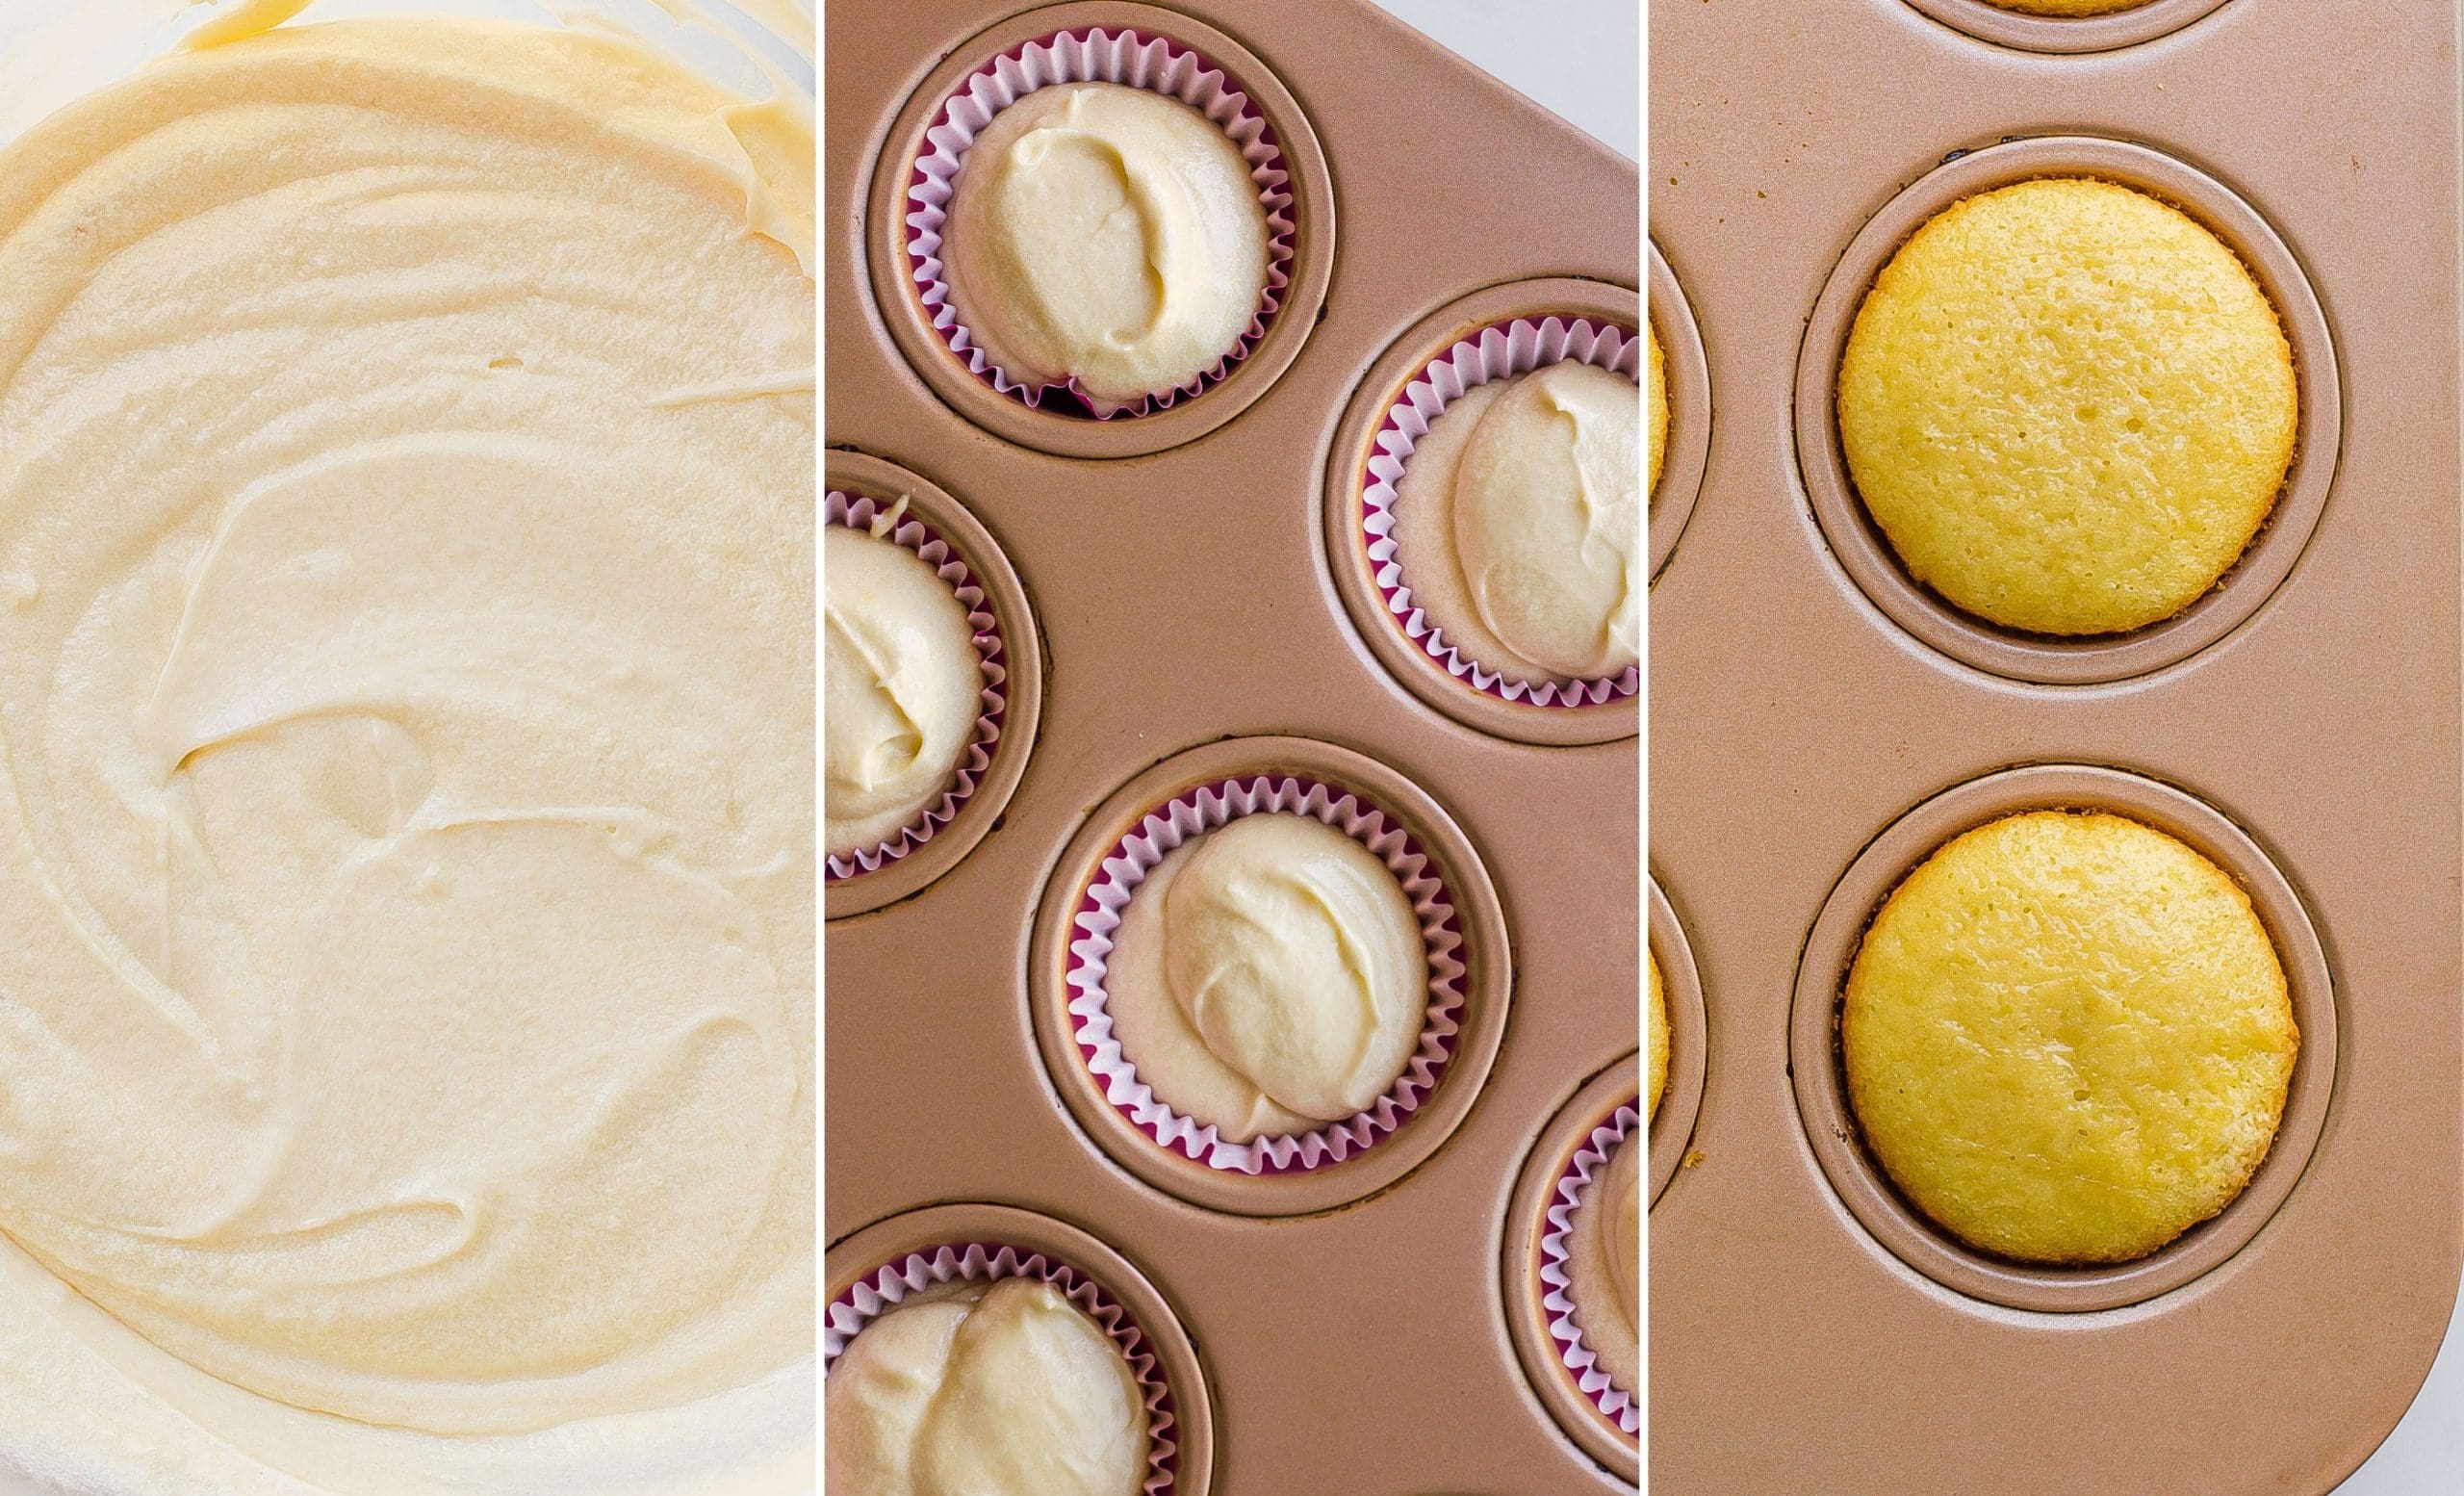 How to make Homemade Vanilla Cupcakes step by step